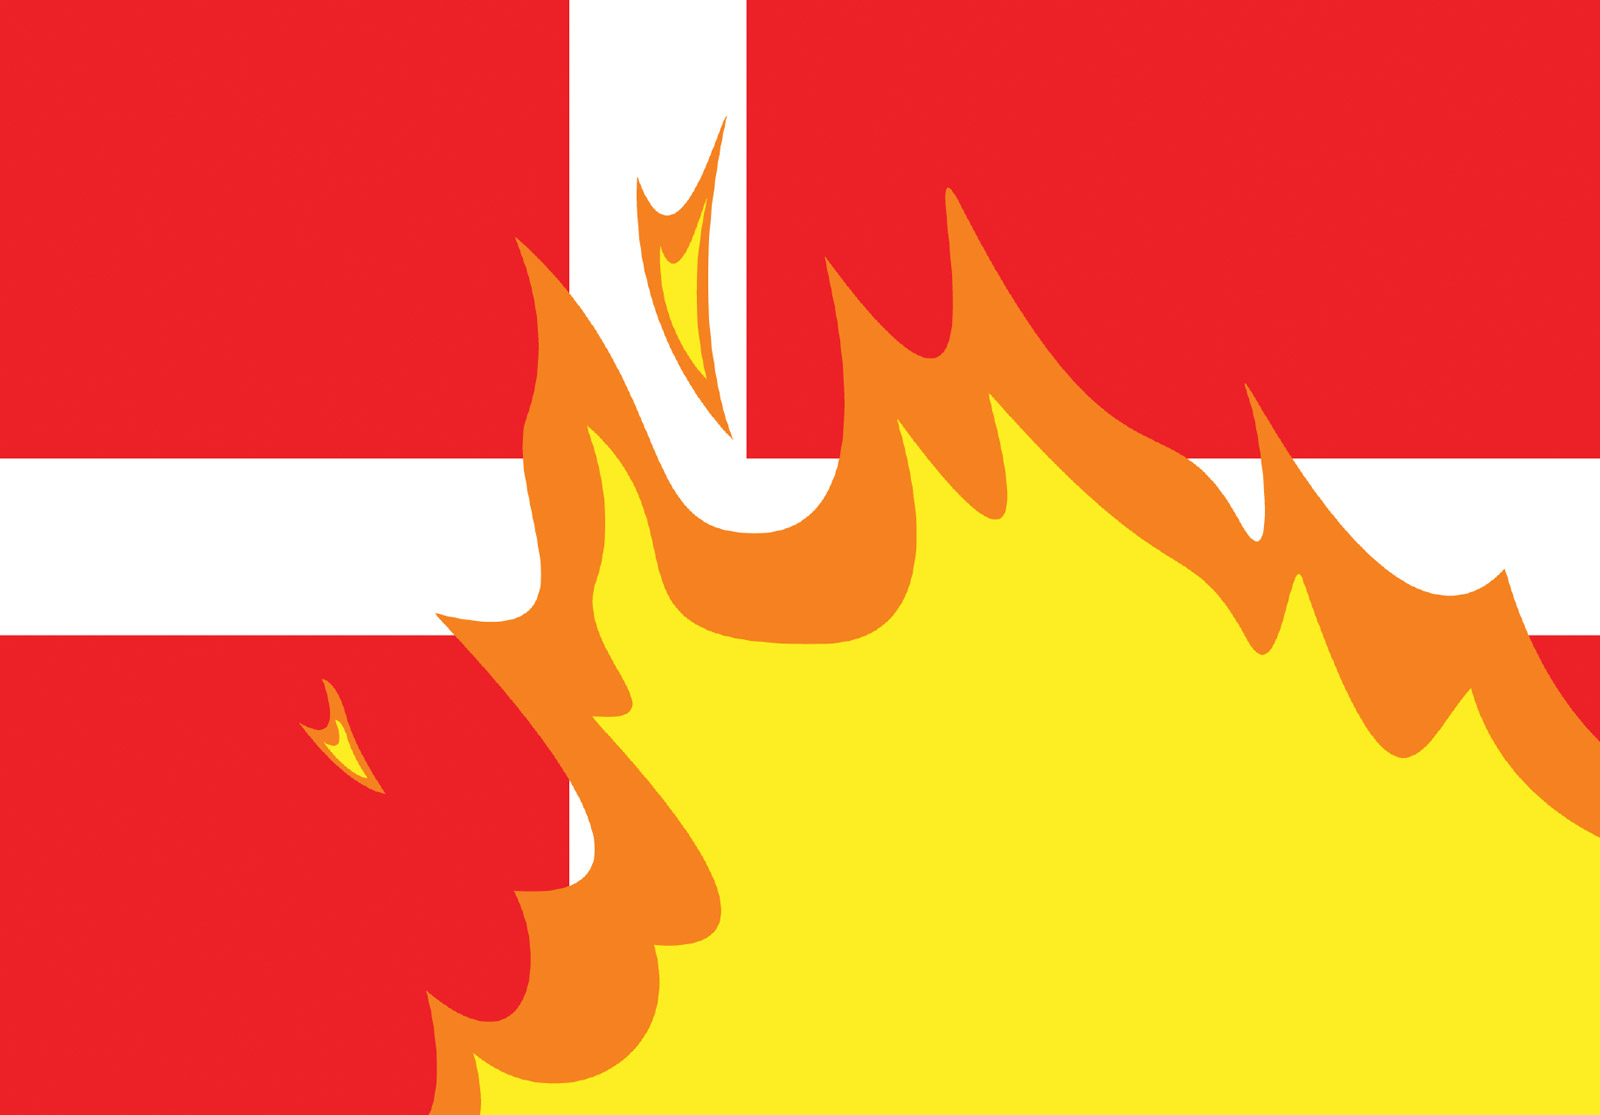 The front of this issue’s postcard featuring “Re-branding Denmark,” a two thousand and seven illustration by the artist group Superflex of the Danish flag on fire.